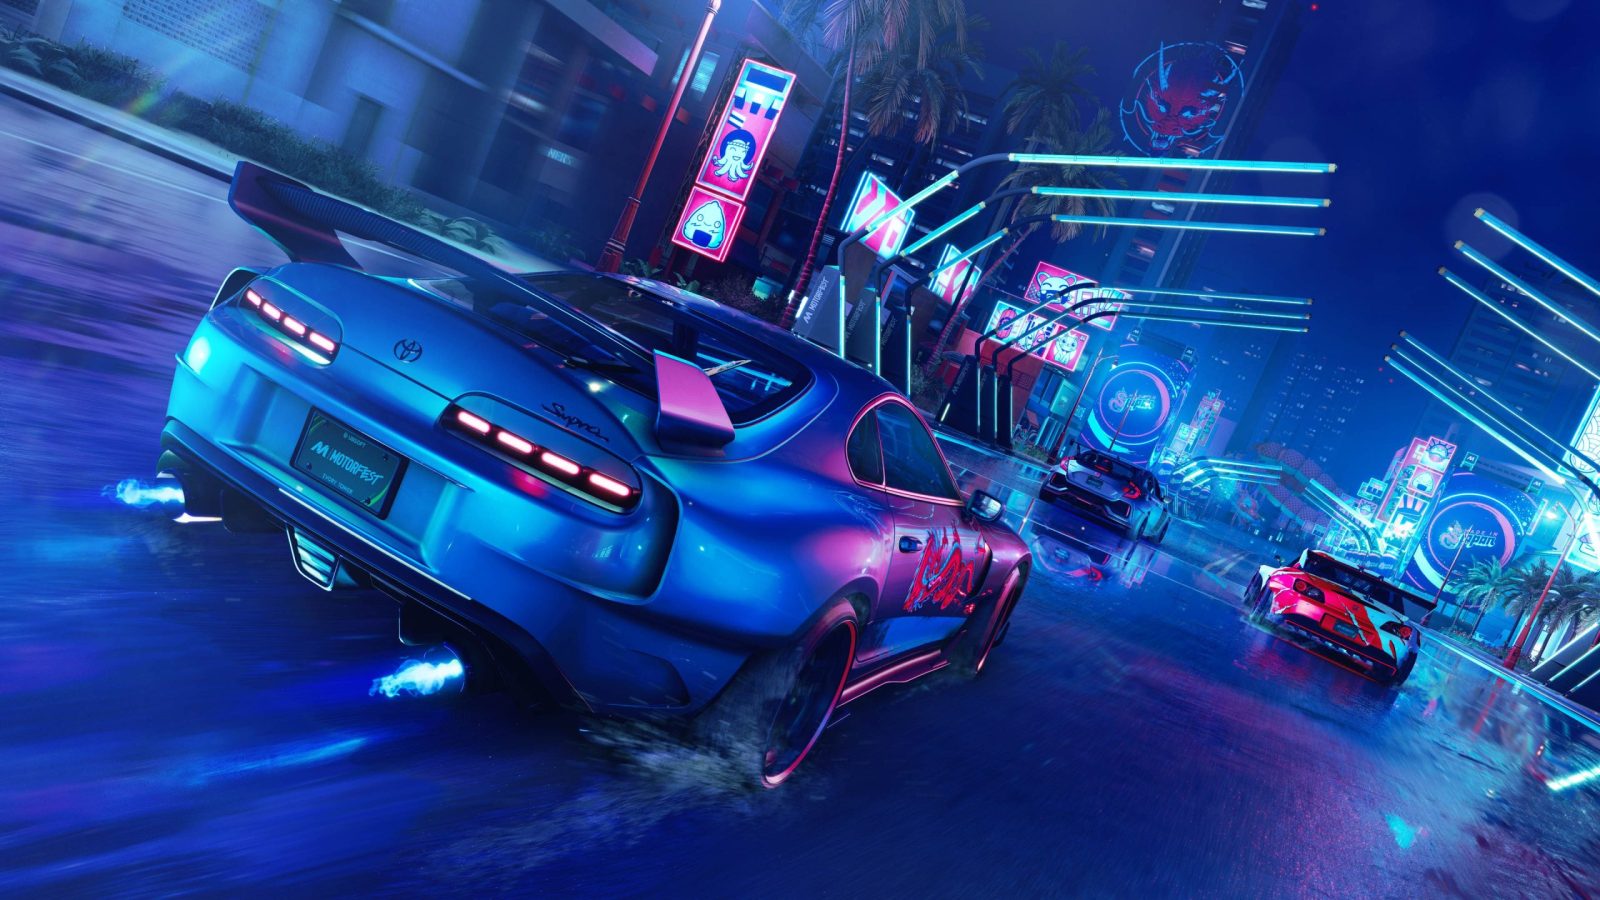 The Crew Motorfest Review: Gameplay Videos, Impressions, Features